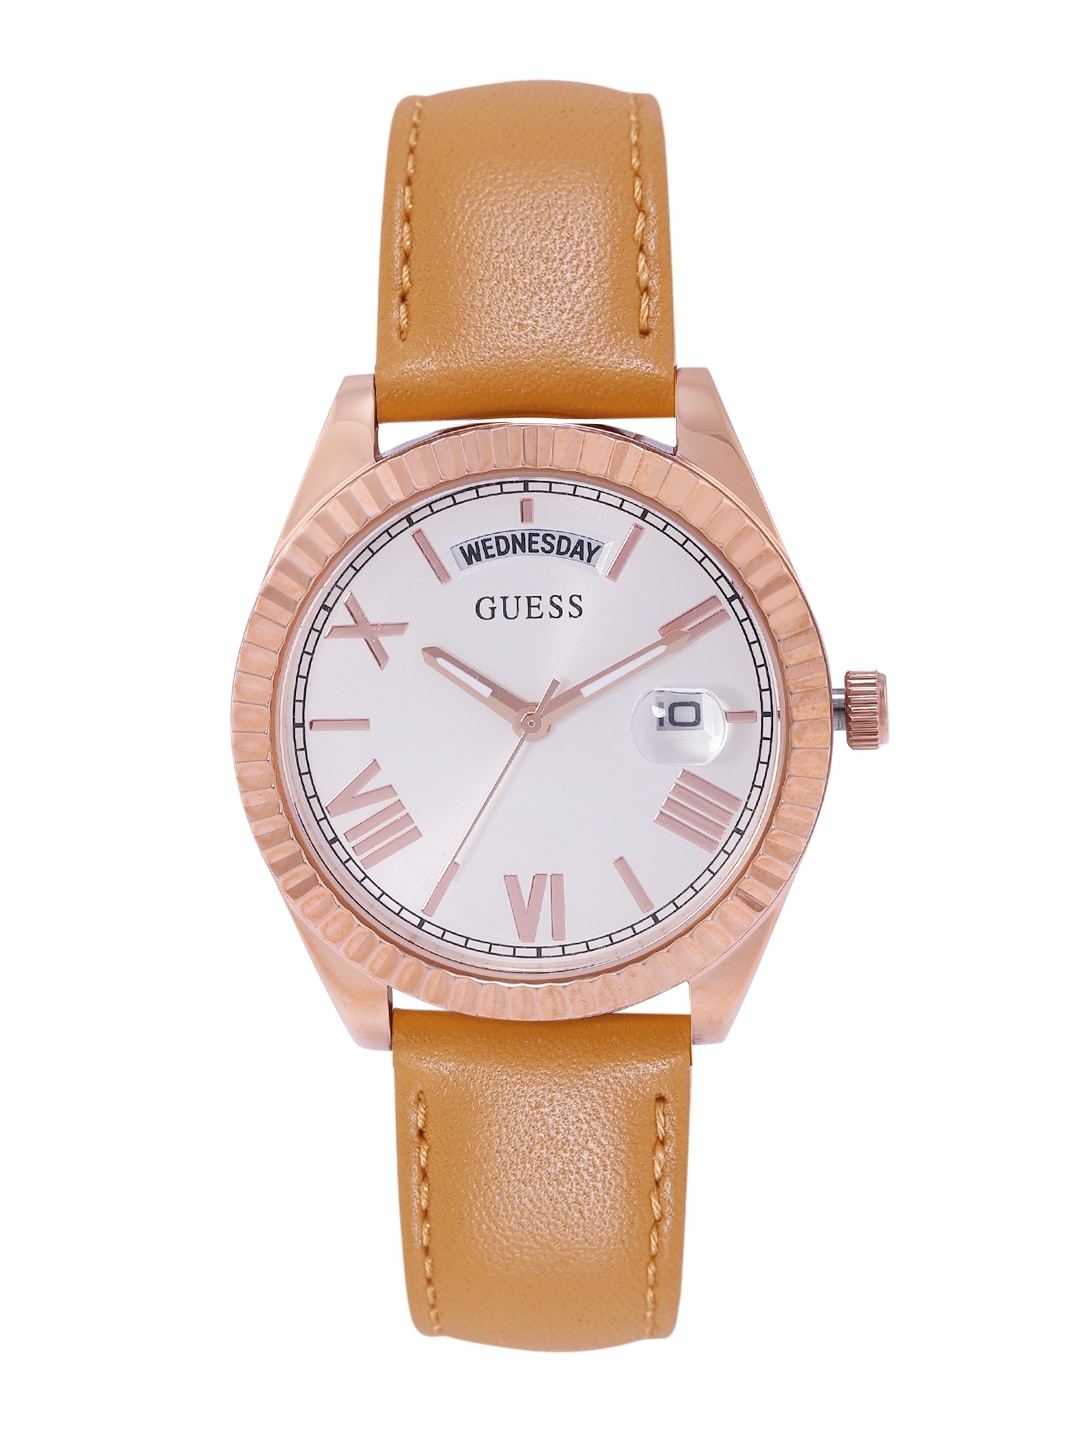 GUESS Women White Dial & Brown Leather Straps Analogue Watch GW0357L2 Price in India